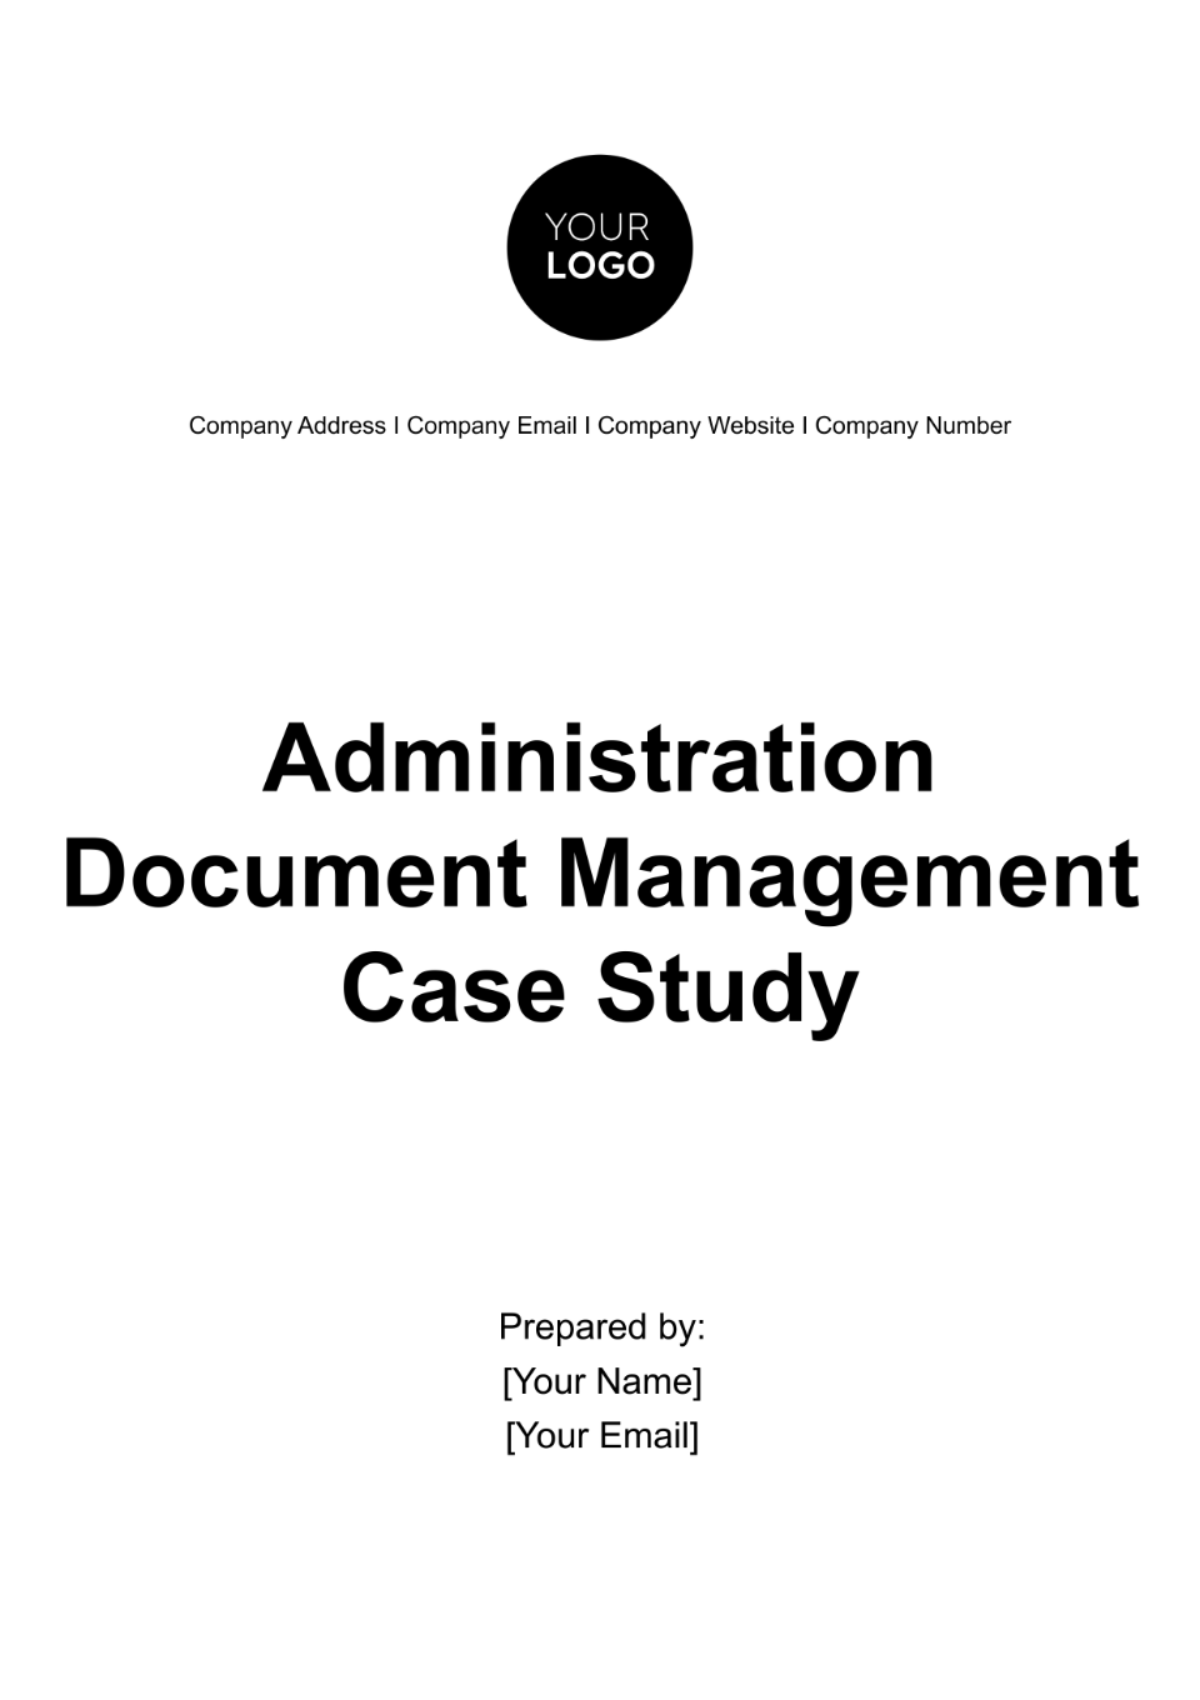 Administration Document Management Case Study Template